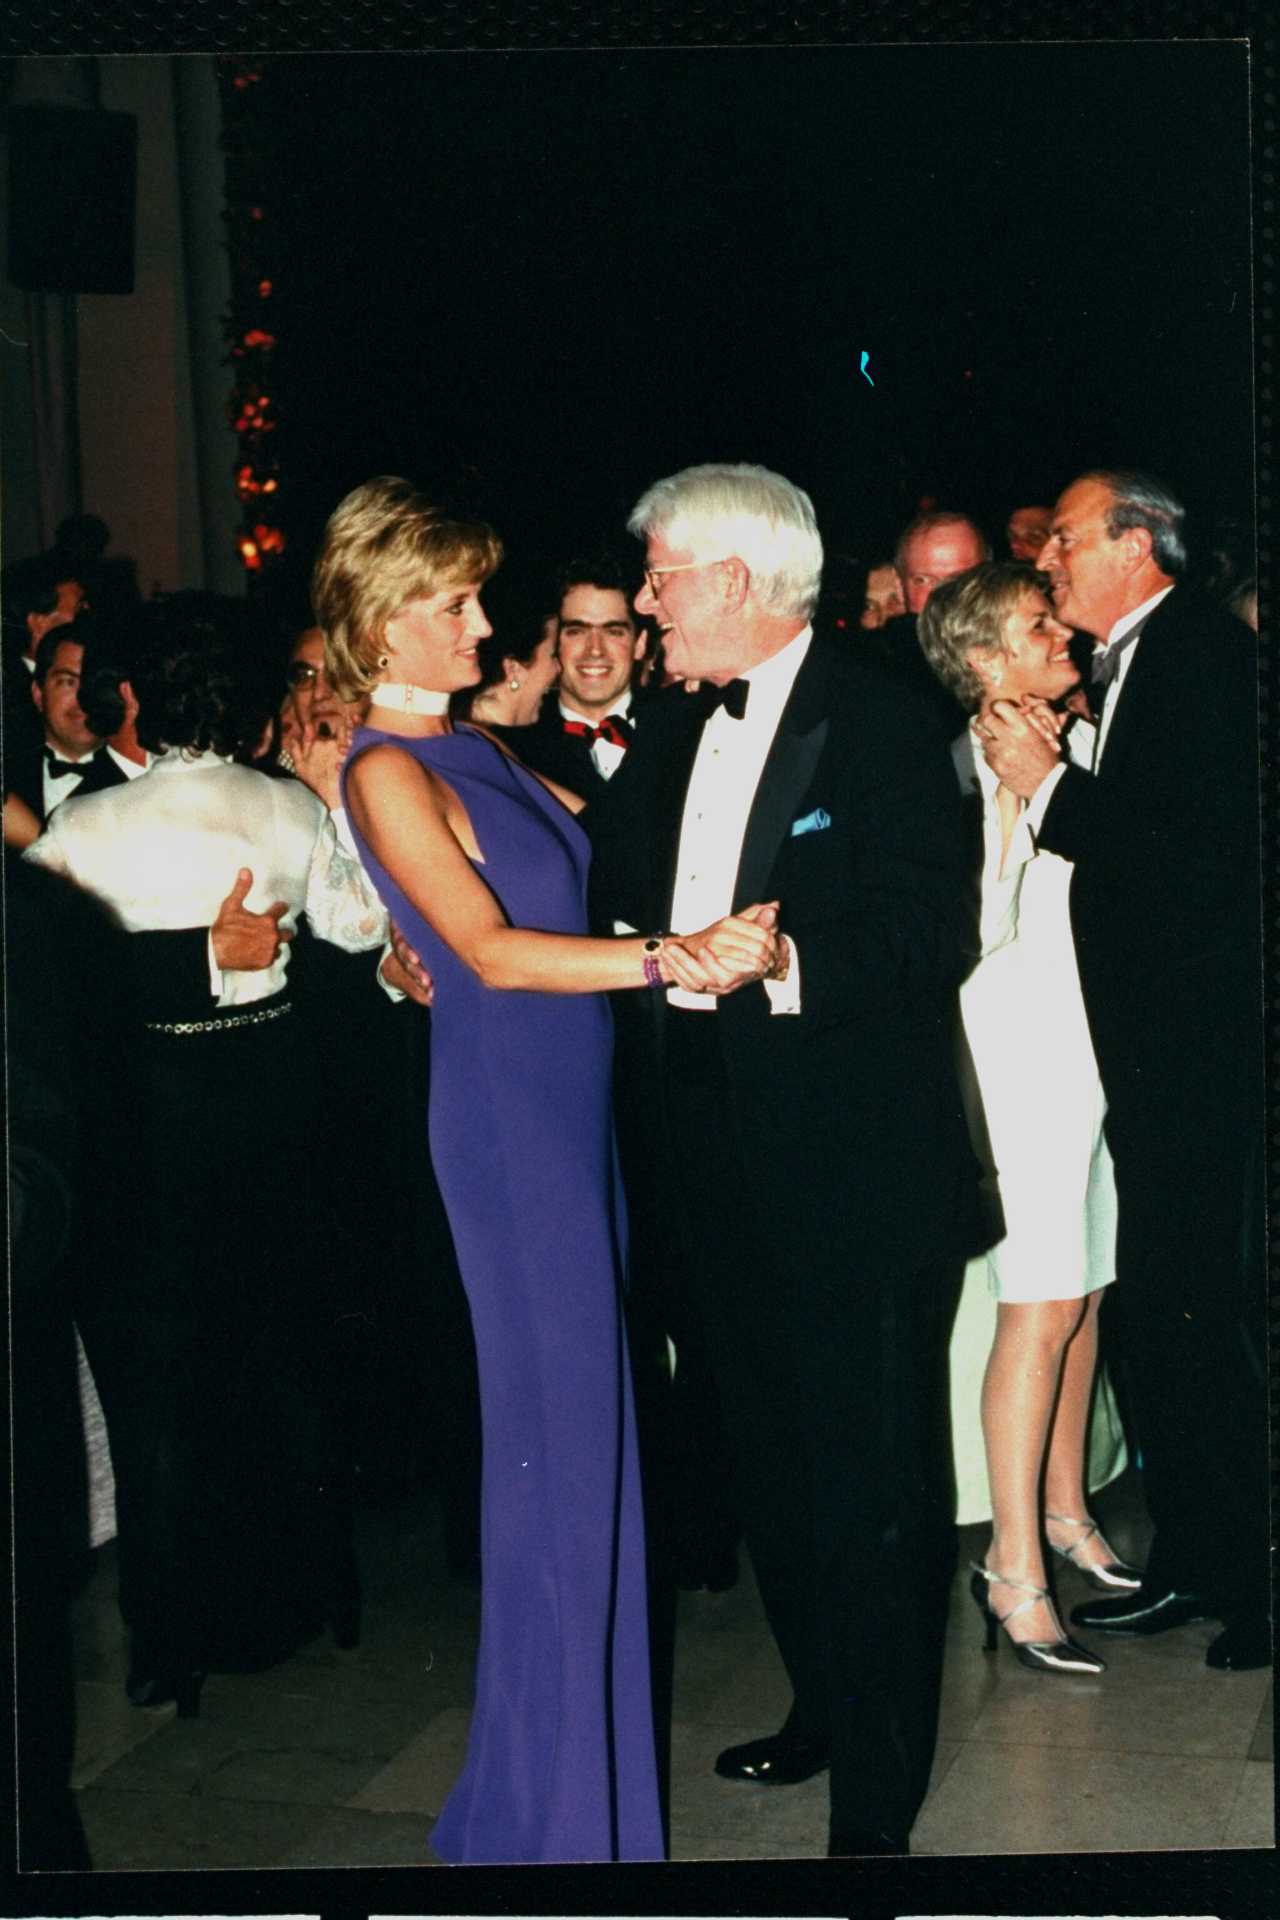 Princess Diana and Phil Donahue | Ken Goff/The LIFE Images Collection via Getty Images/Getty Images